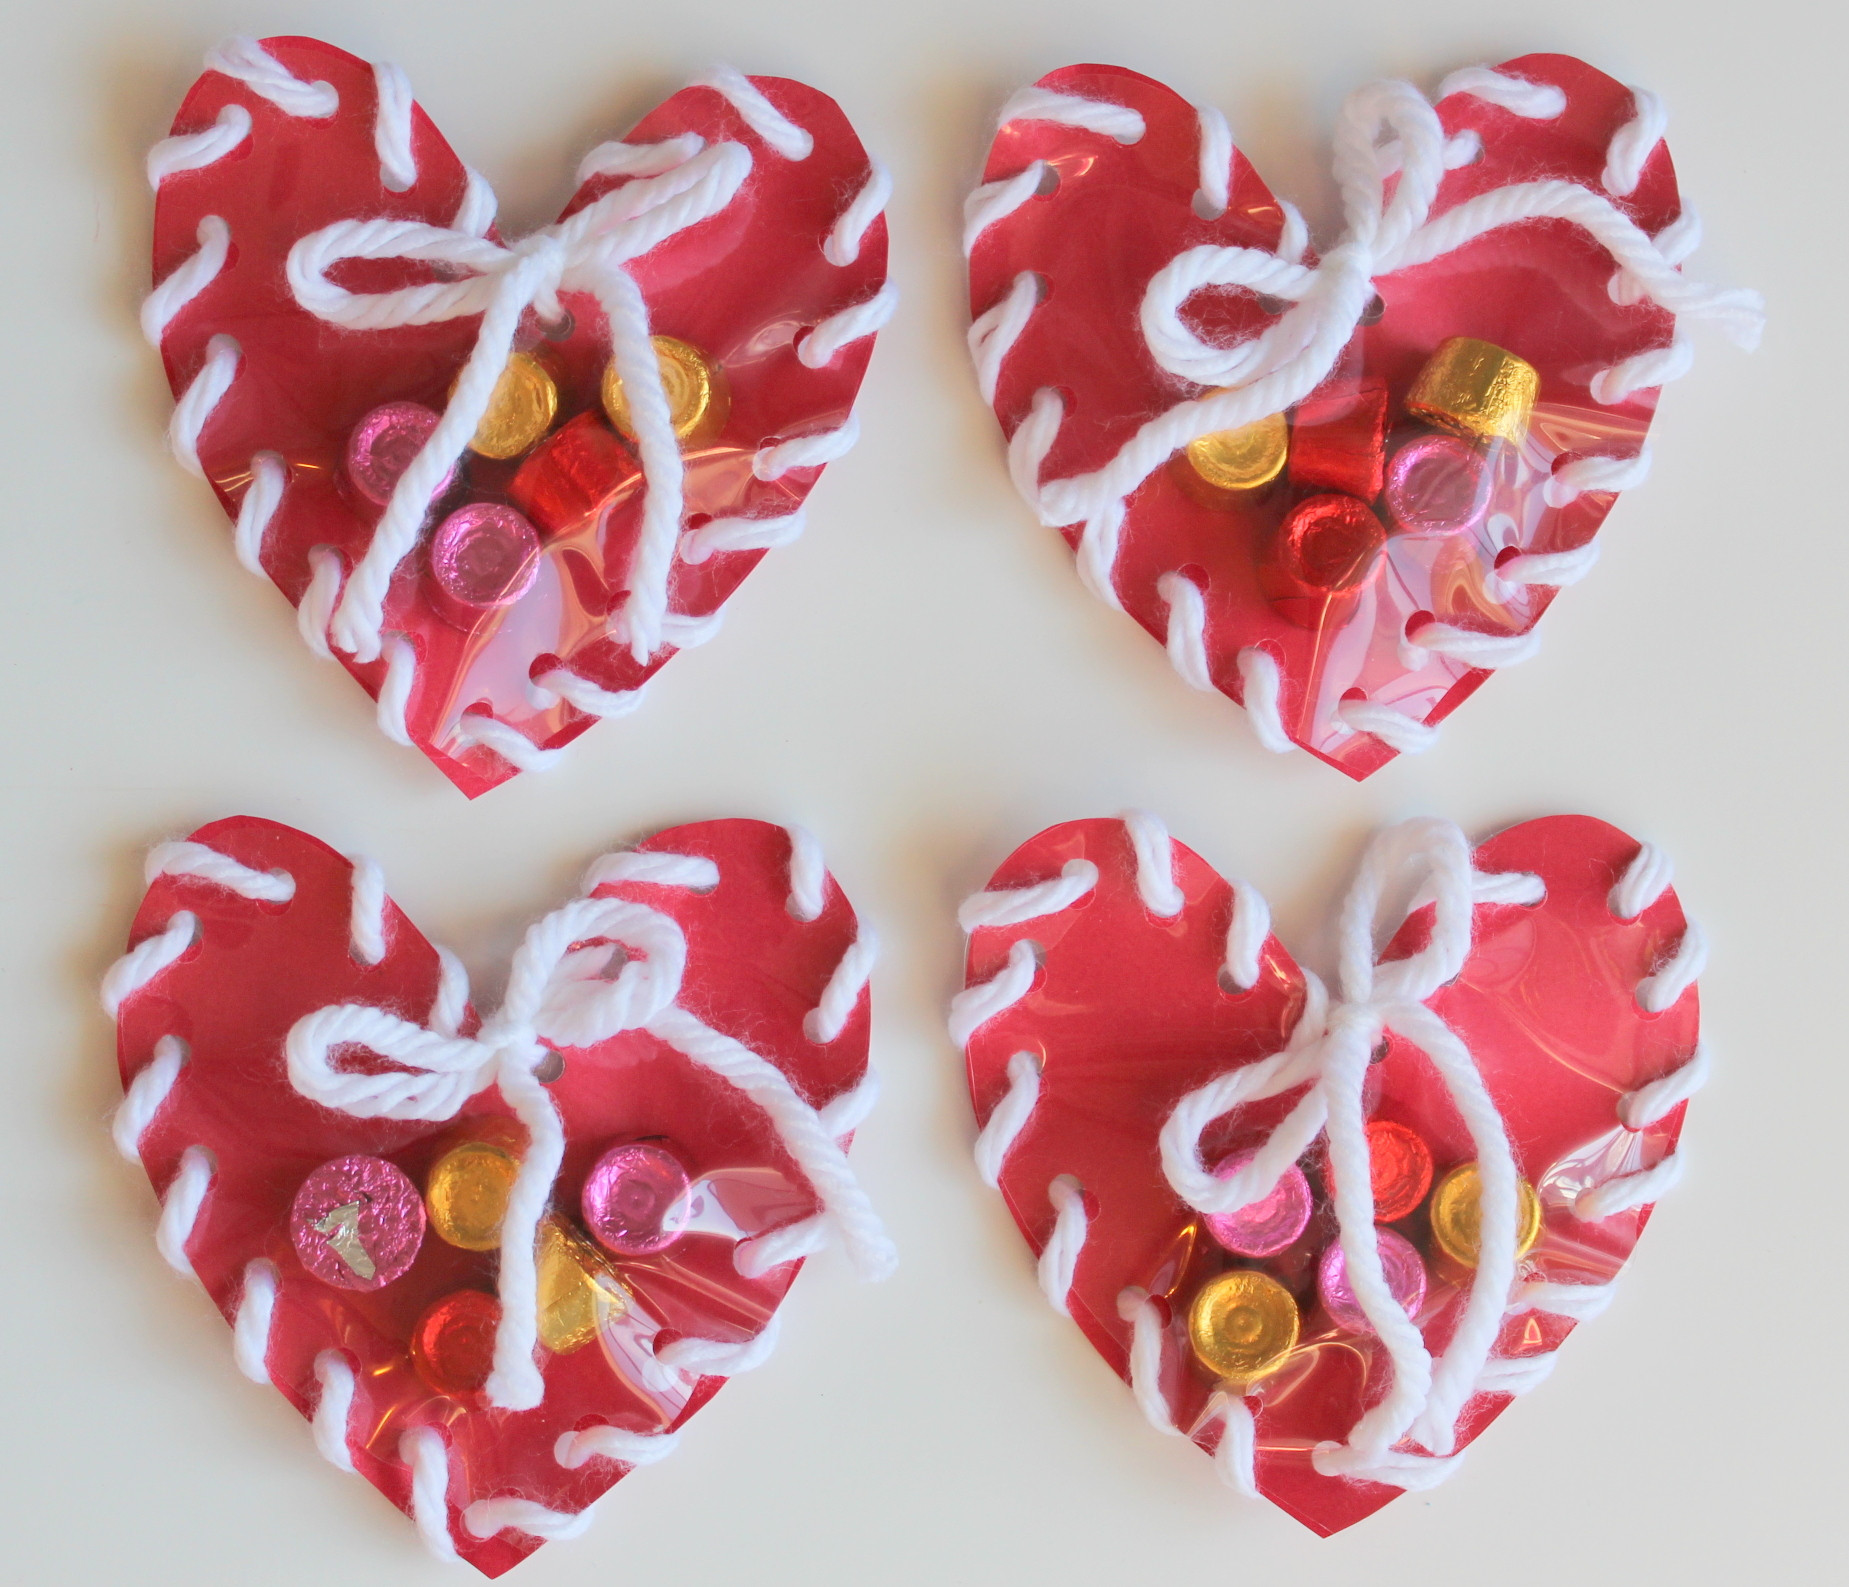 Valentine Art Projects For Toddlers
 Lollydot Hand Sewn Paper Heart Valentine Craft for Kids